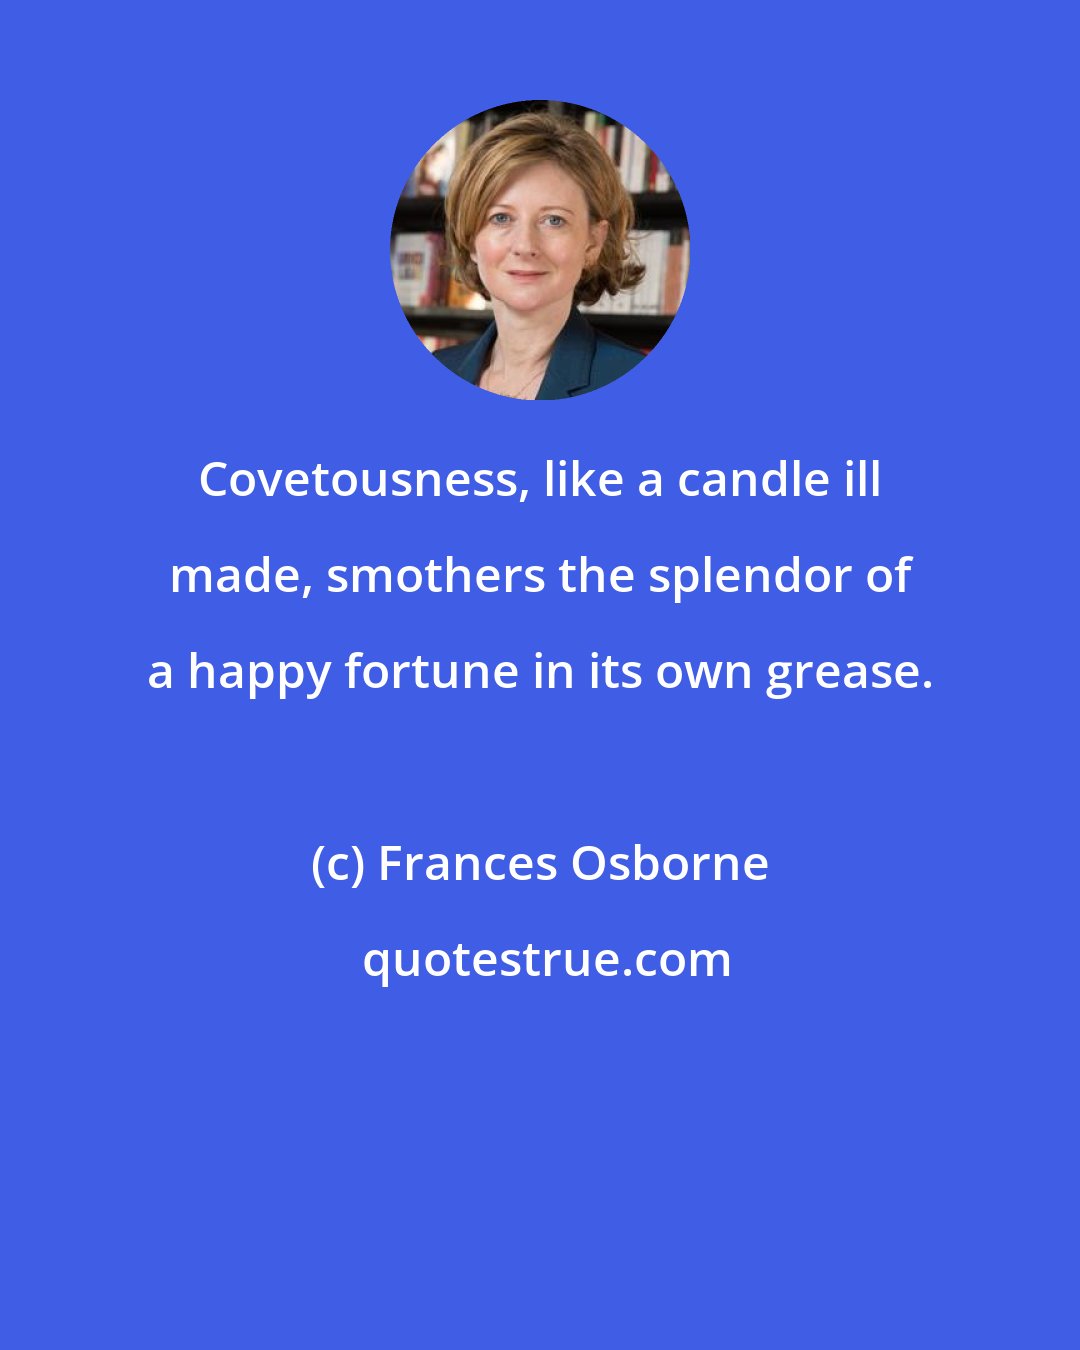 Frances Osborne: Covetousness, like a candle ill made, smothers the splendor of a happy fortune in its own grease.